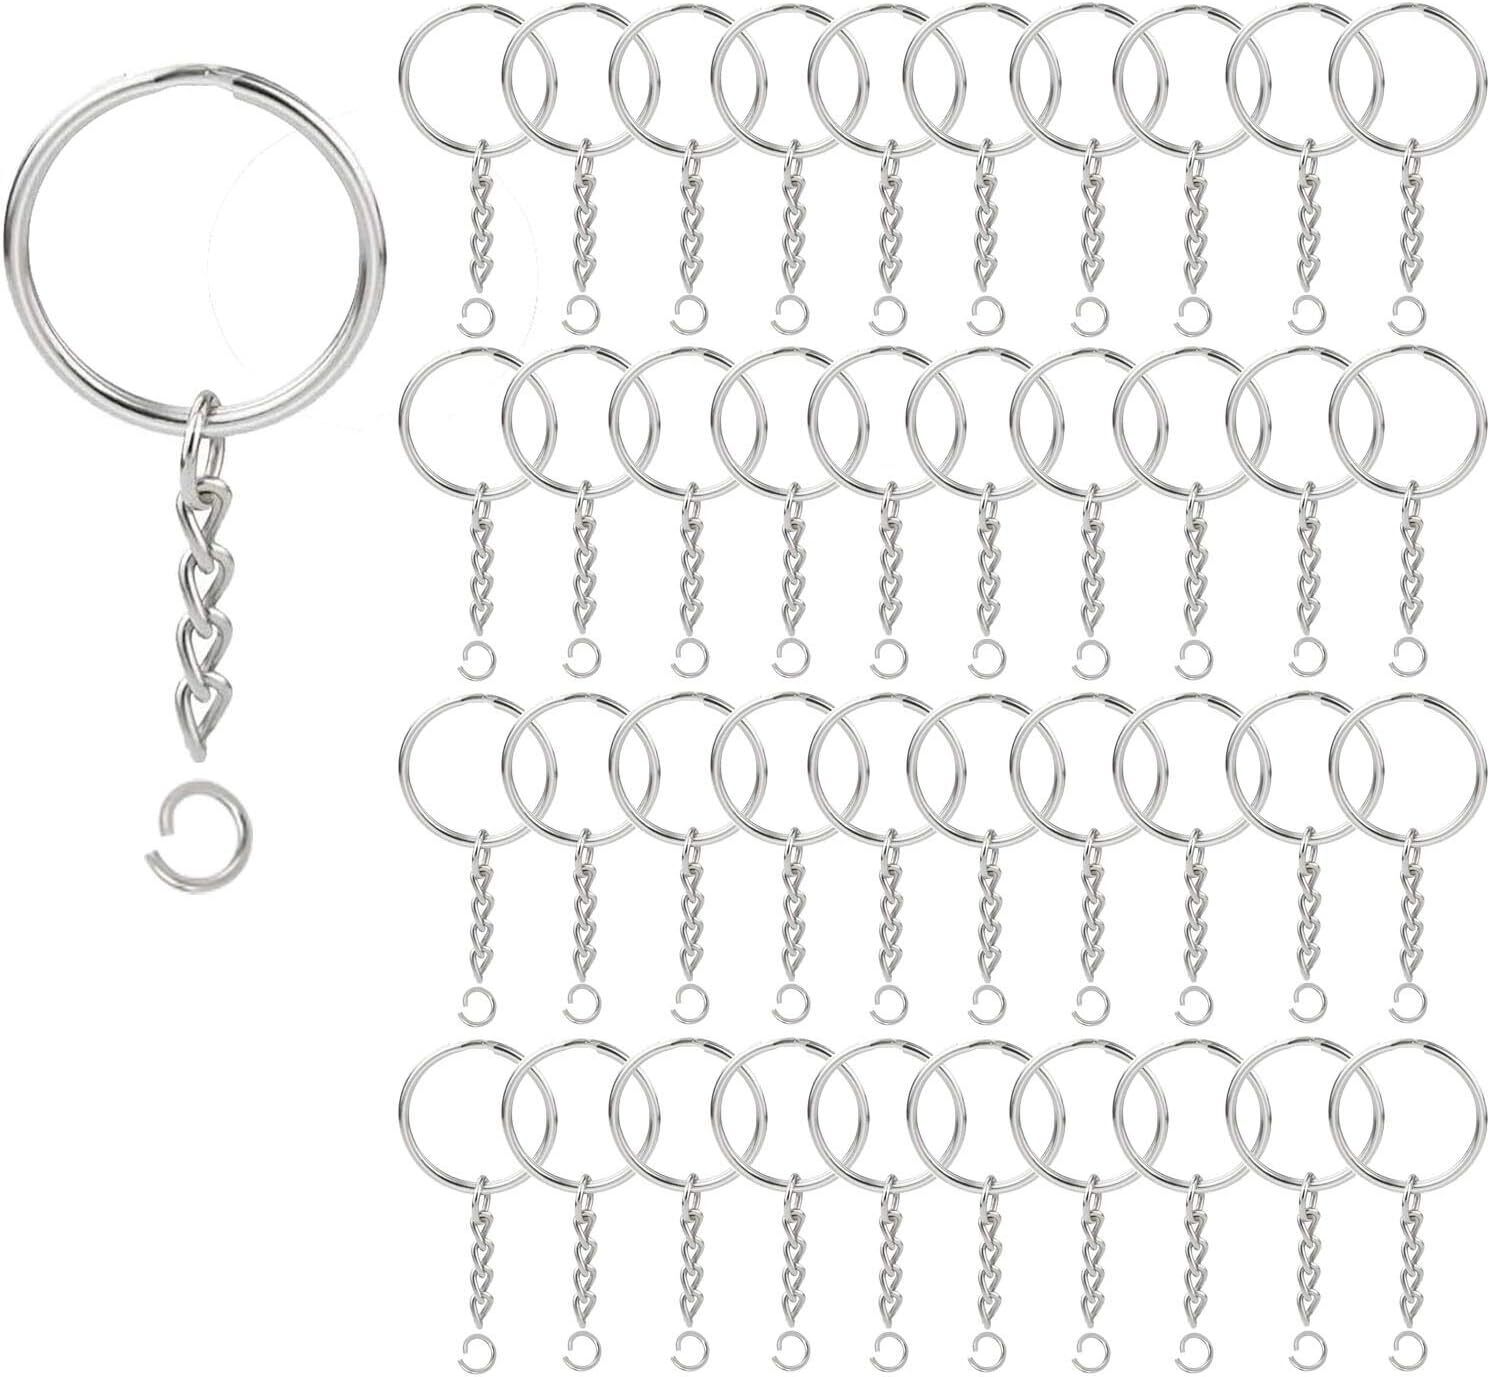 Key Rings with Chain and Open Jump Rings for Craft Making Jewelry 100 Pack